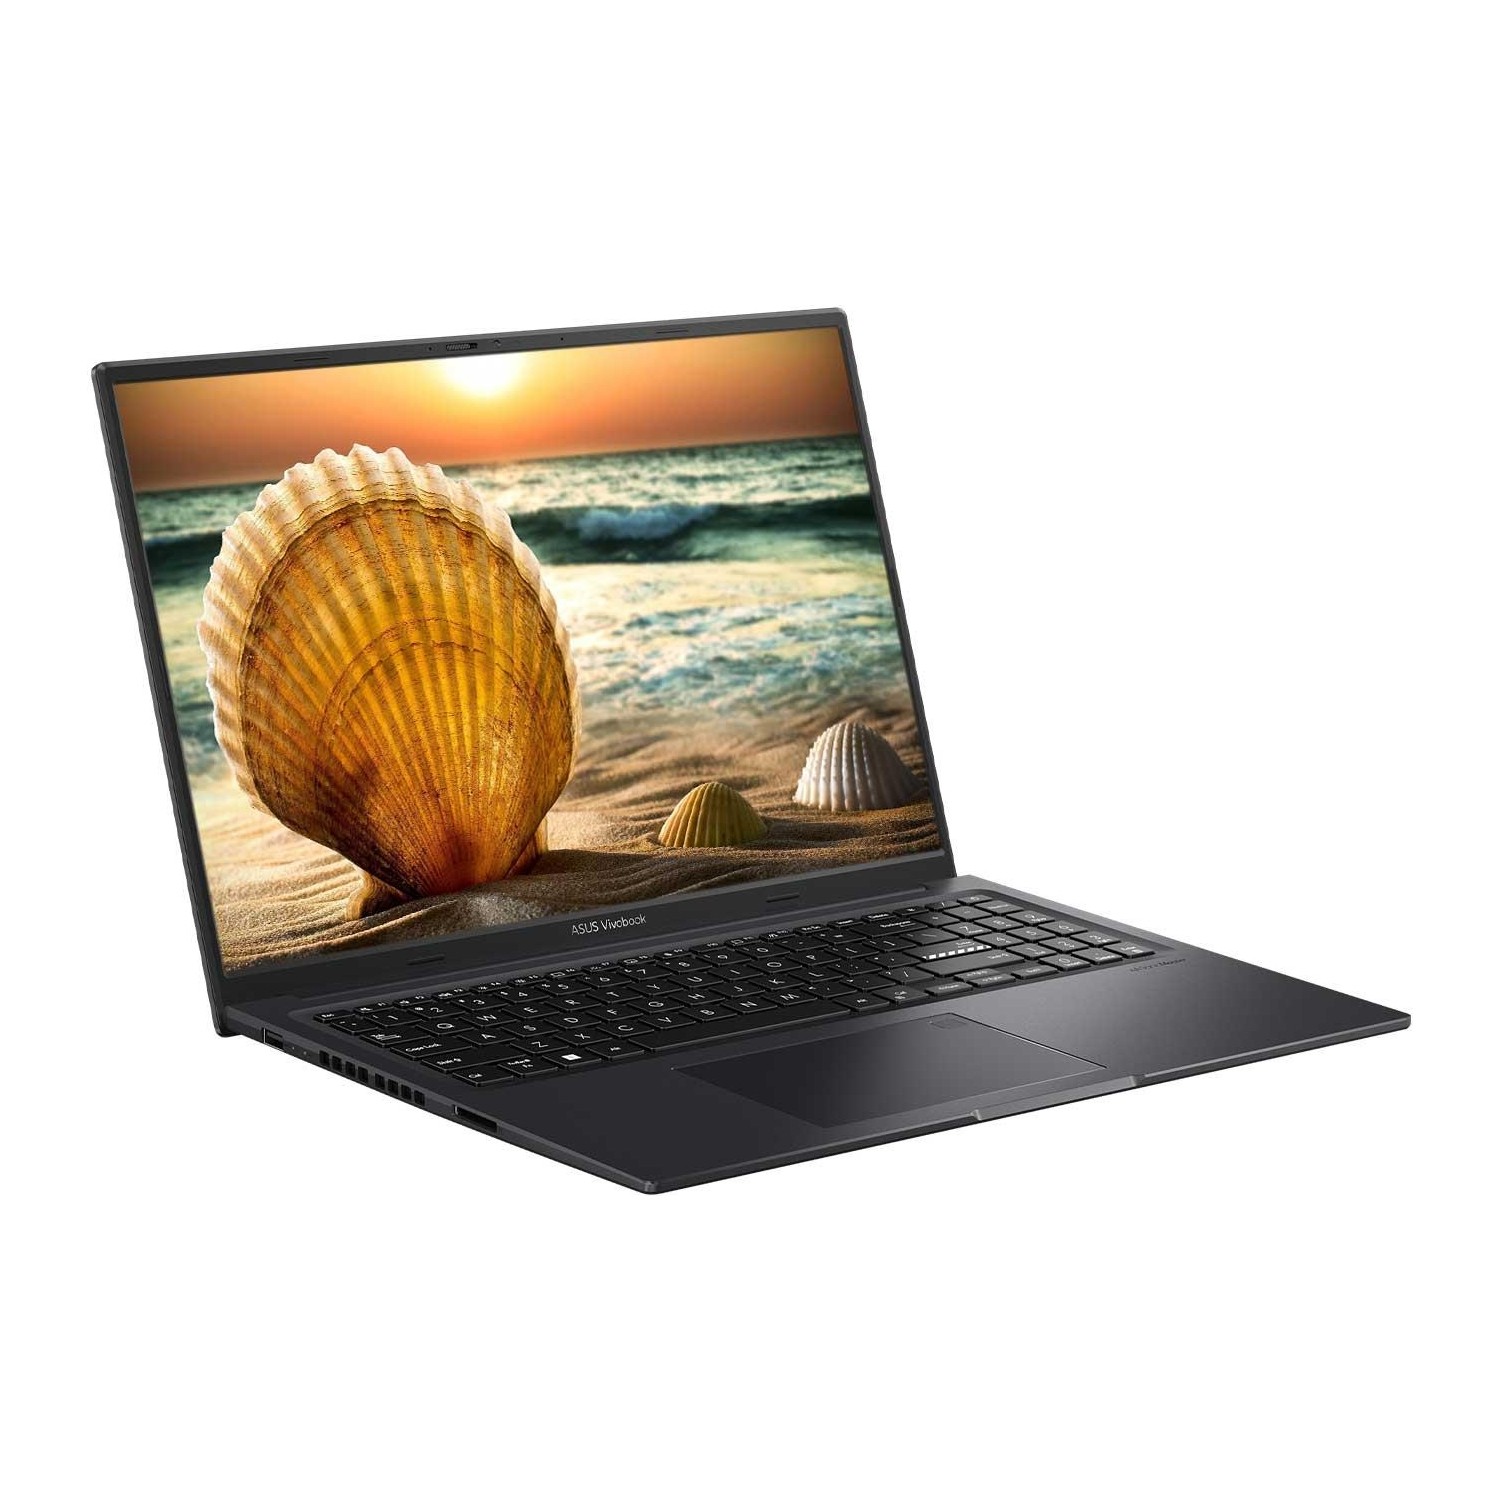 ASUS VİVOBOOK 16X K3605ZC-N1013W I5-12450H 8GB 512GB SSD 4GB RTX3050 16" FHD WIN11 HOME NOTEBOOK